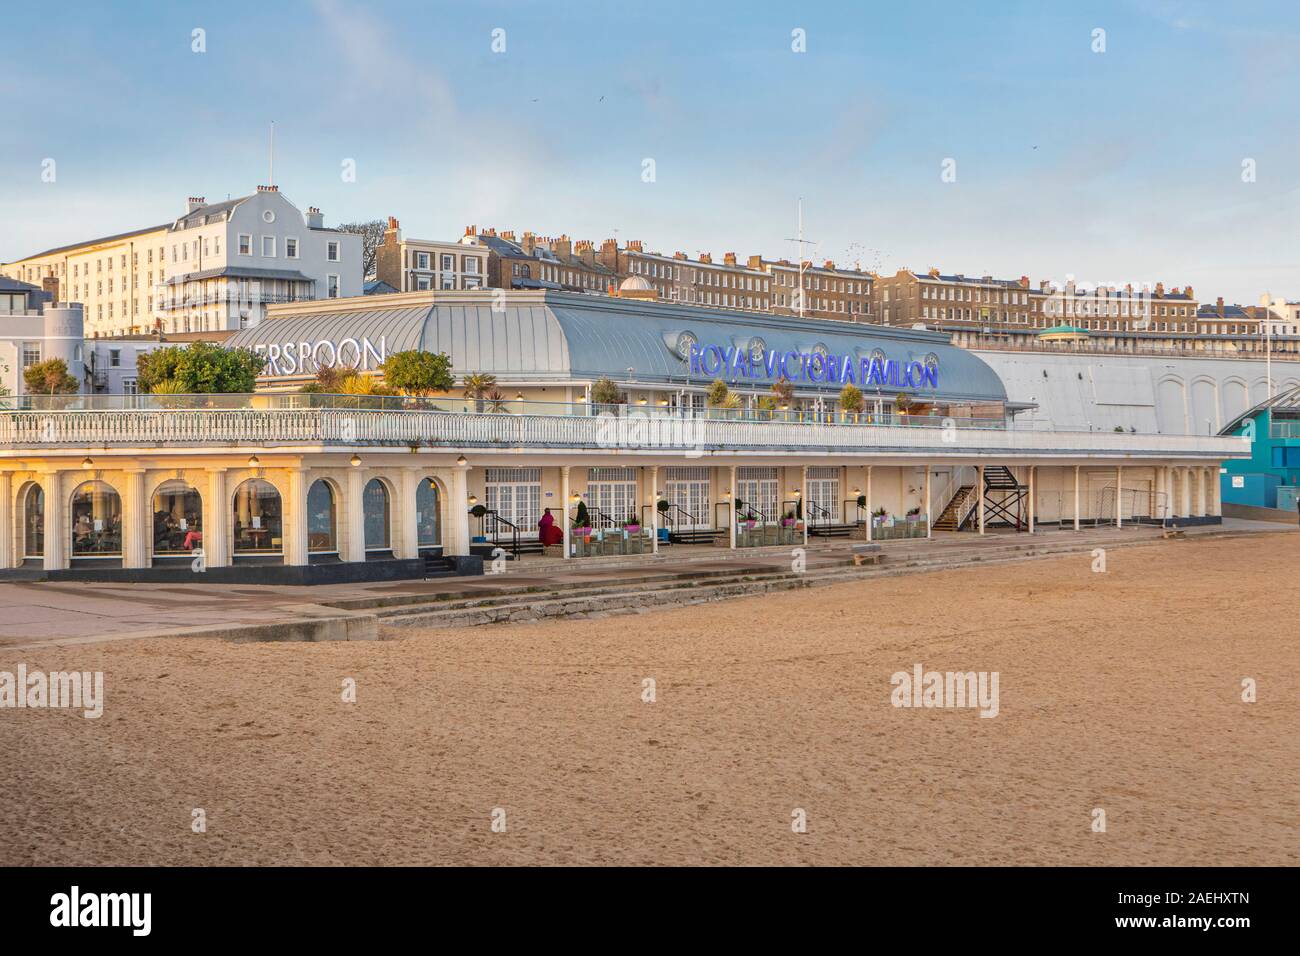 The Wetherspoons Royal Victoria Pavilion, Ramsgate, Kent Stock Photo